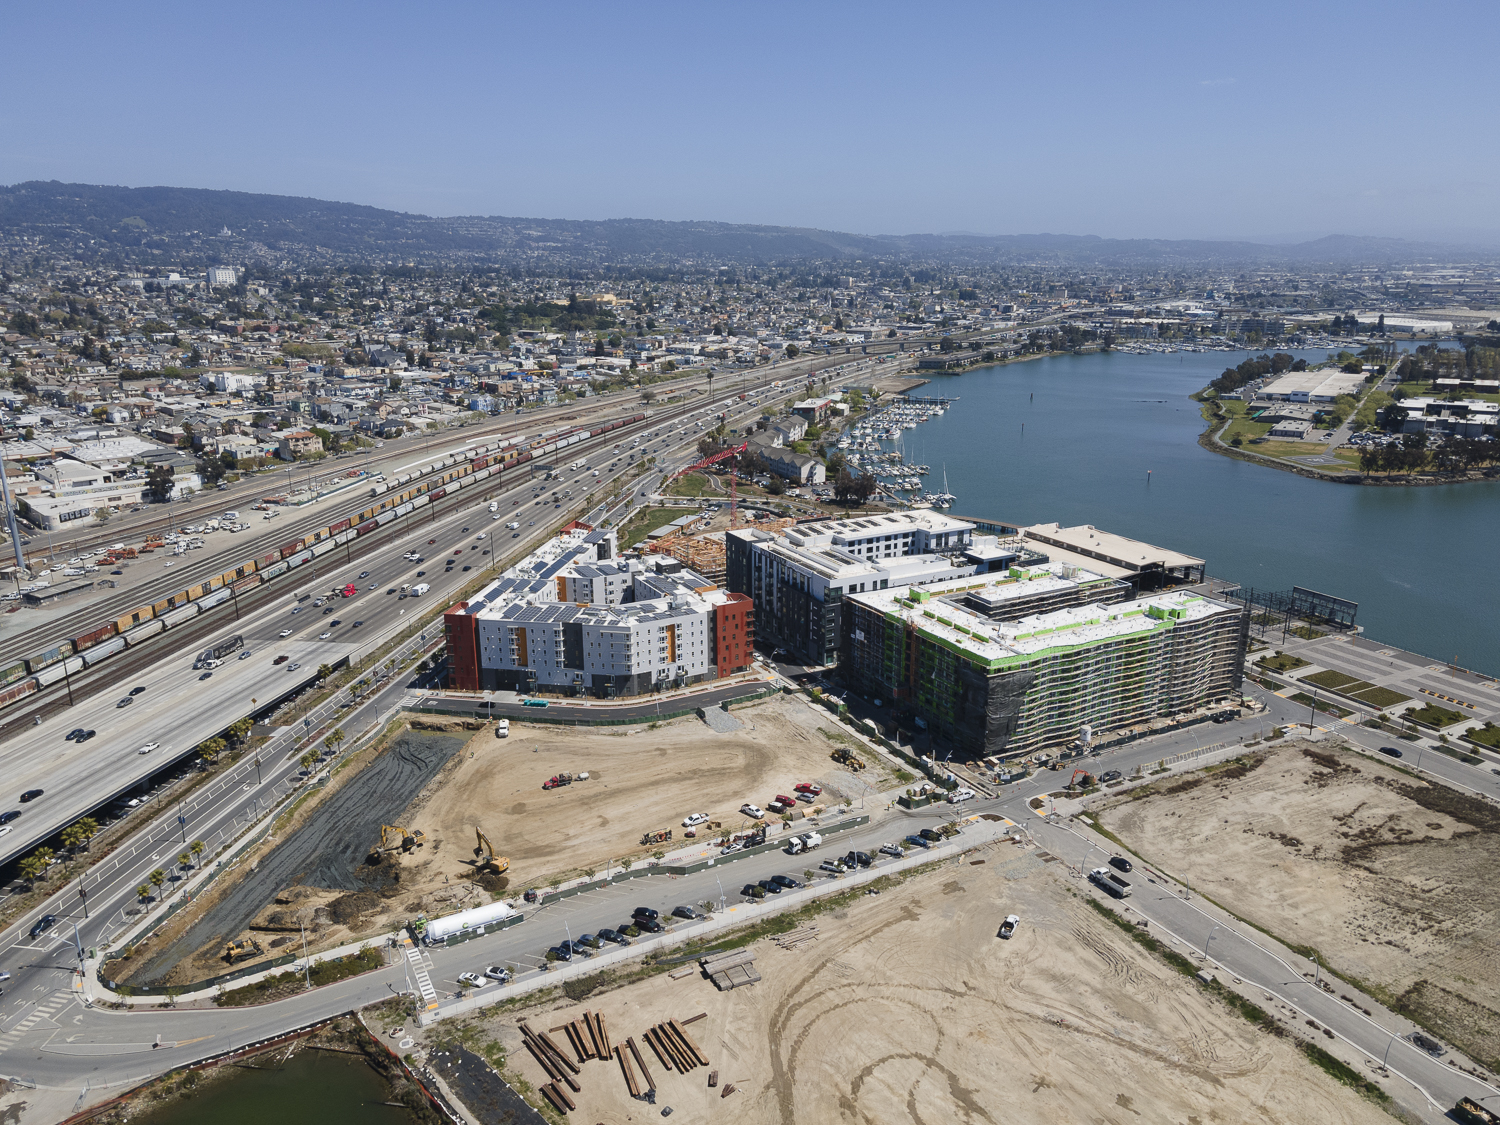 Brooklyn Basin aerial view, image by Andrew Campbell Nelson